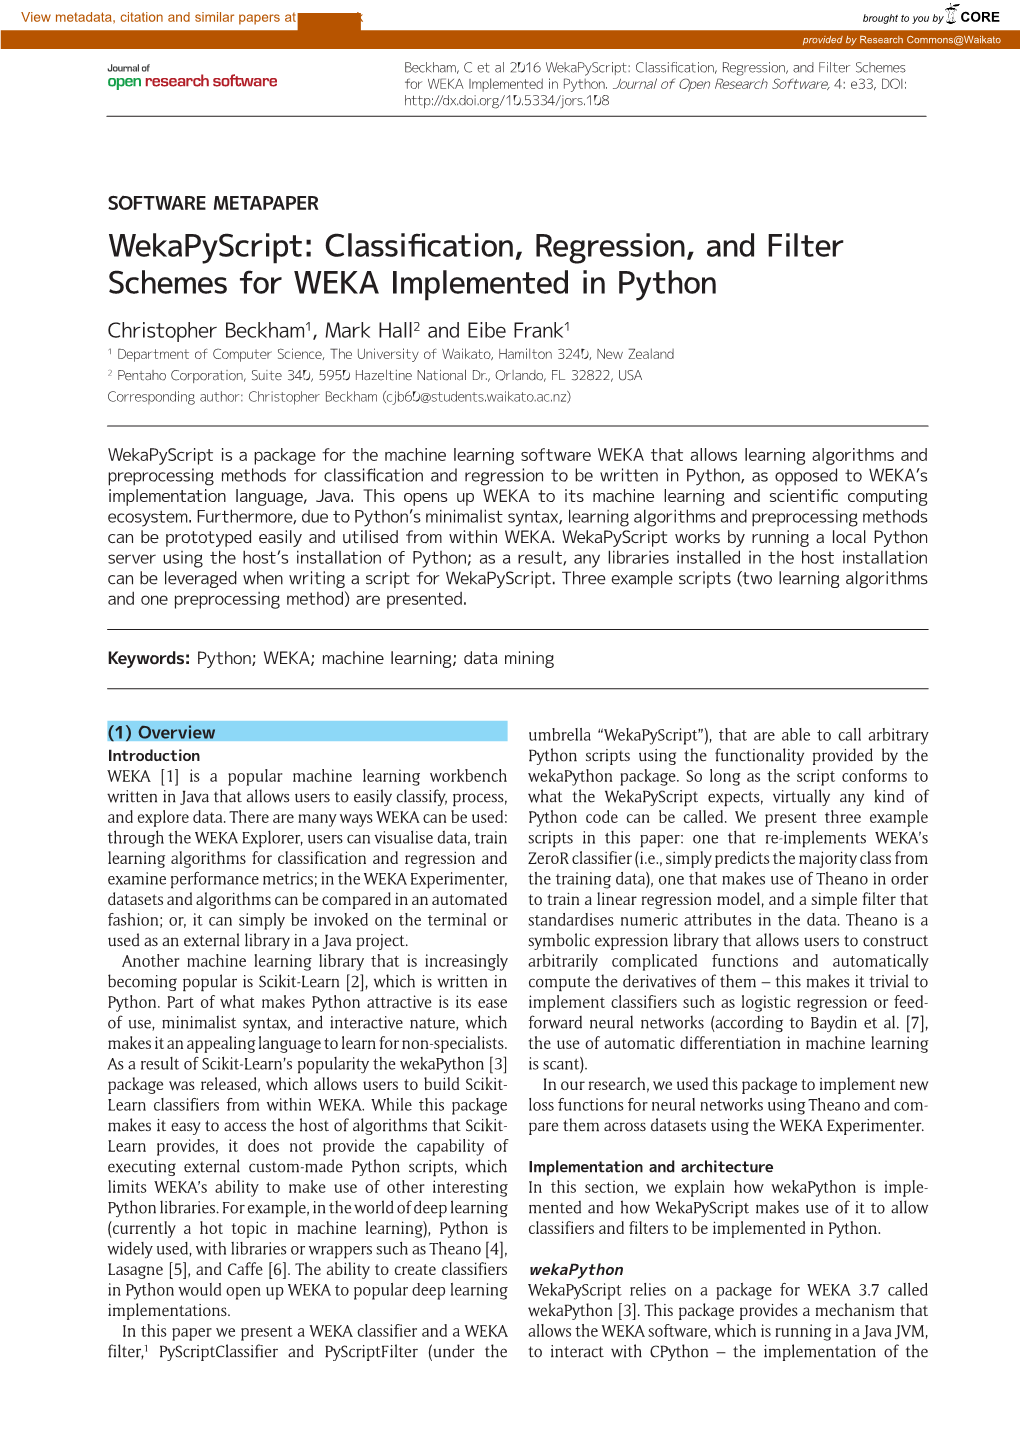 Classification, Regression, and Filter Schemes for WEKA